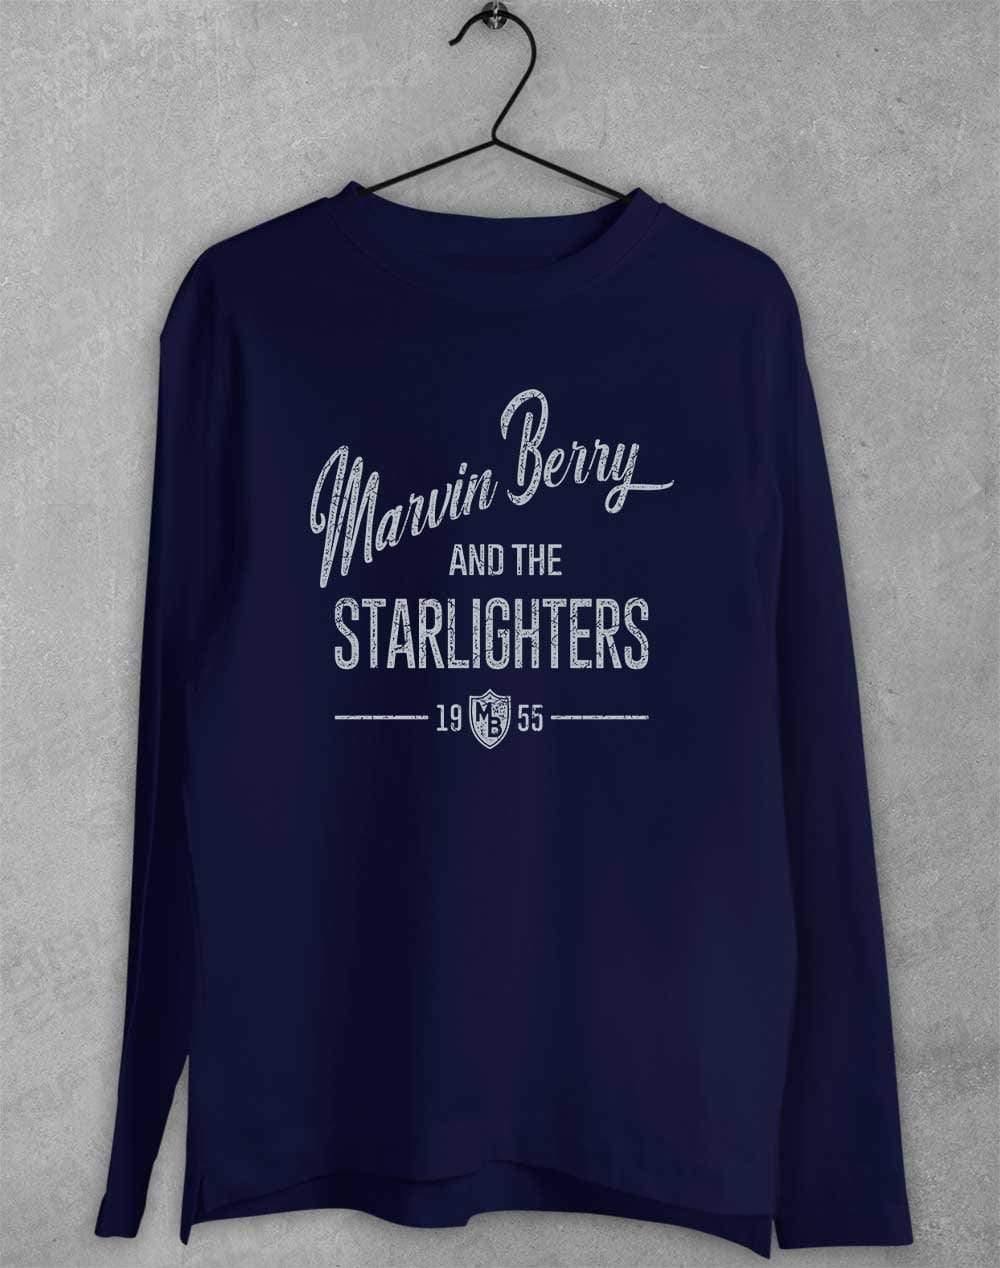 Marvin Berry and the Starlighters Long Sleeve T-Shirt S / Navy  - Off World Tees